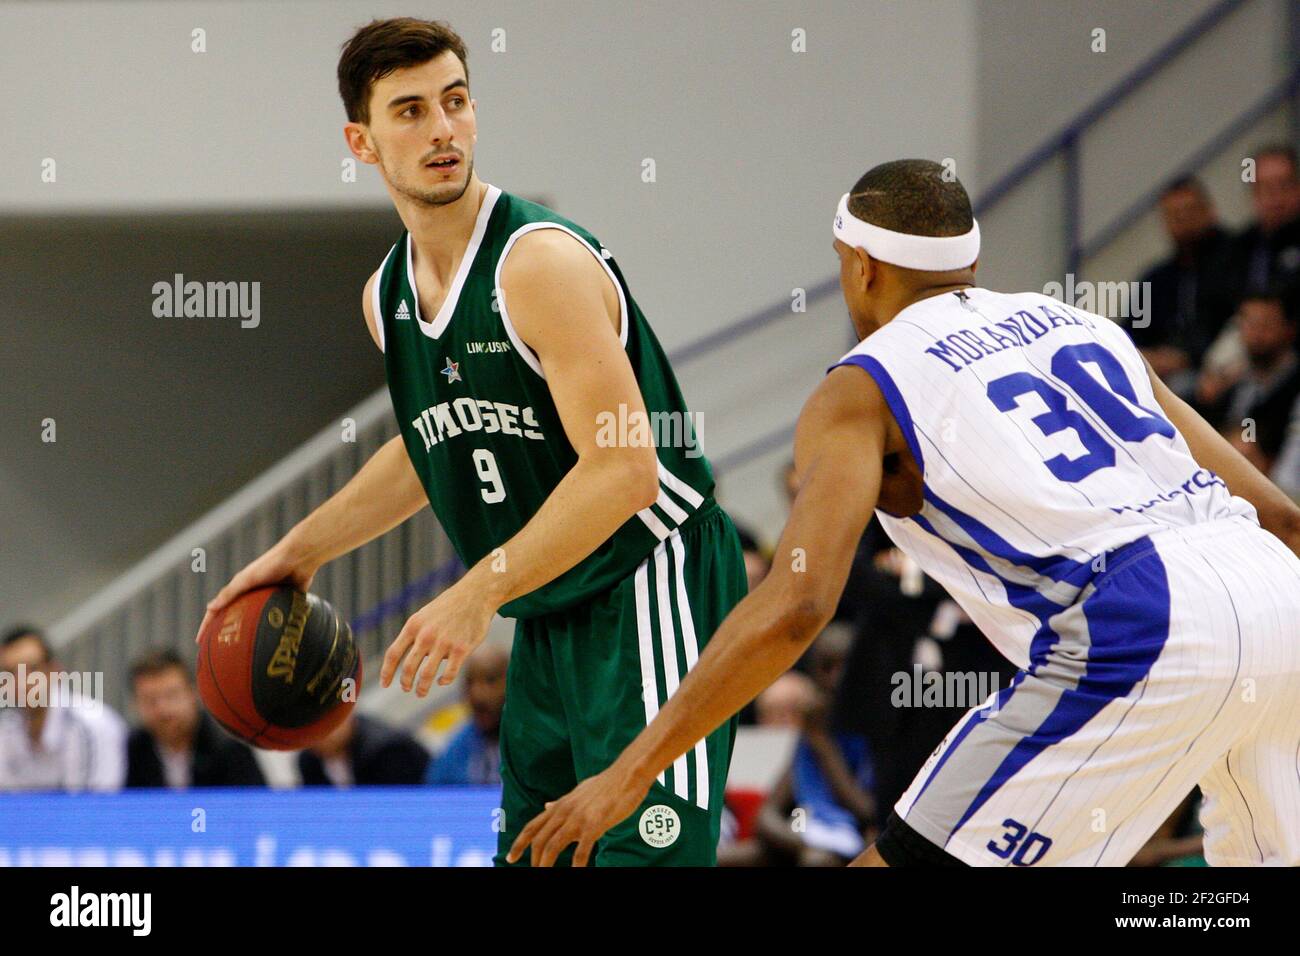 Leo WESTERMANN (9 CSP) and Michel MORANDAIS (30 CCRB) during the French Pro-A  basket-ball, CCRB (Champagne Chalons Reims Basket) v Limoges (CSP), at  Salle Rene Tys in Reims, France, on December 16,